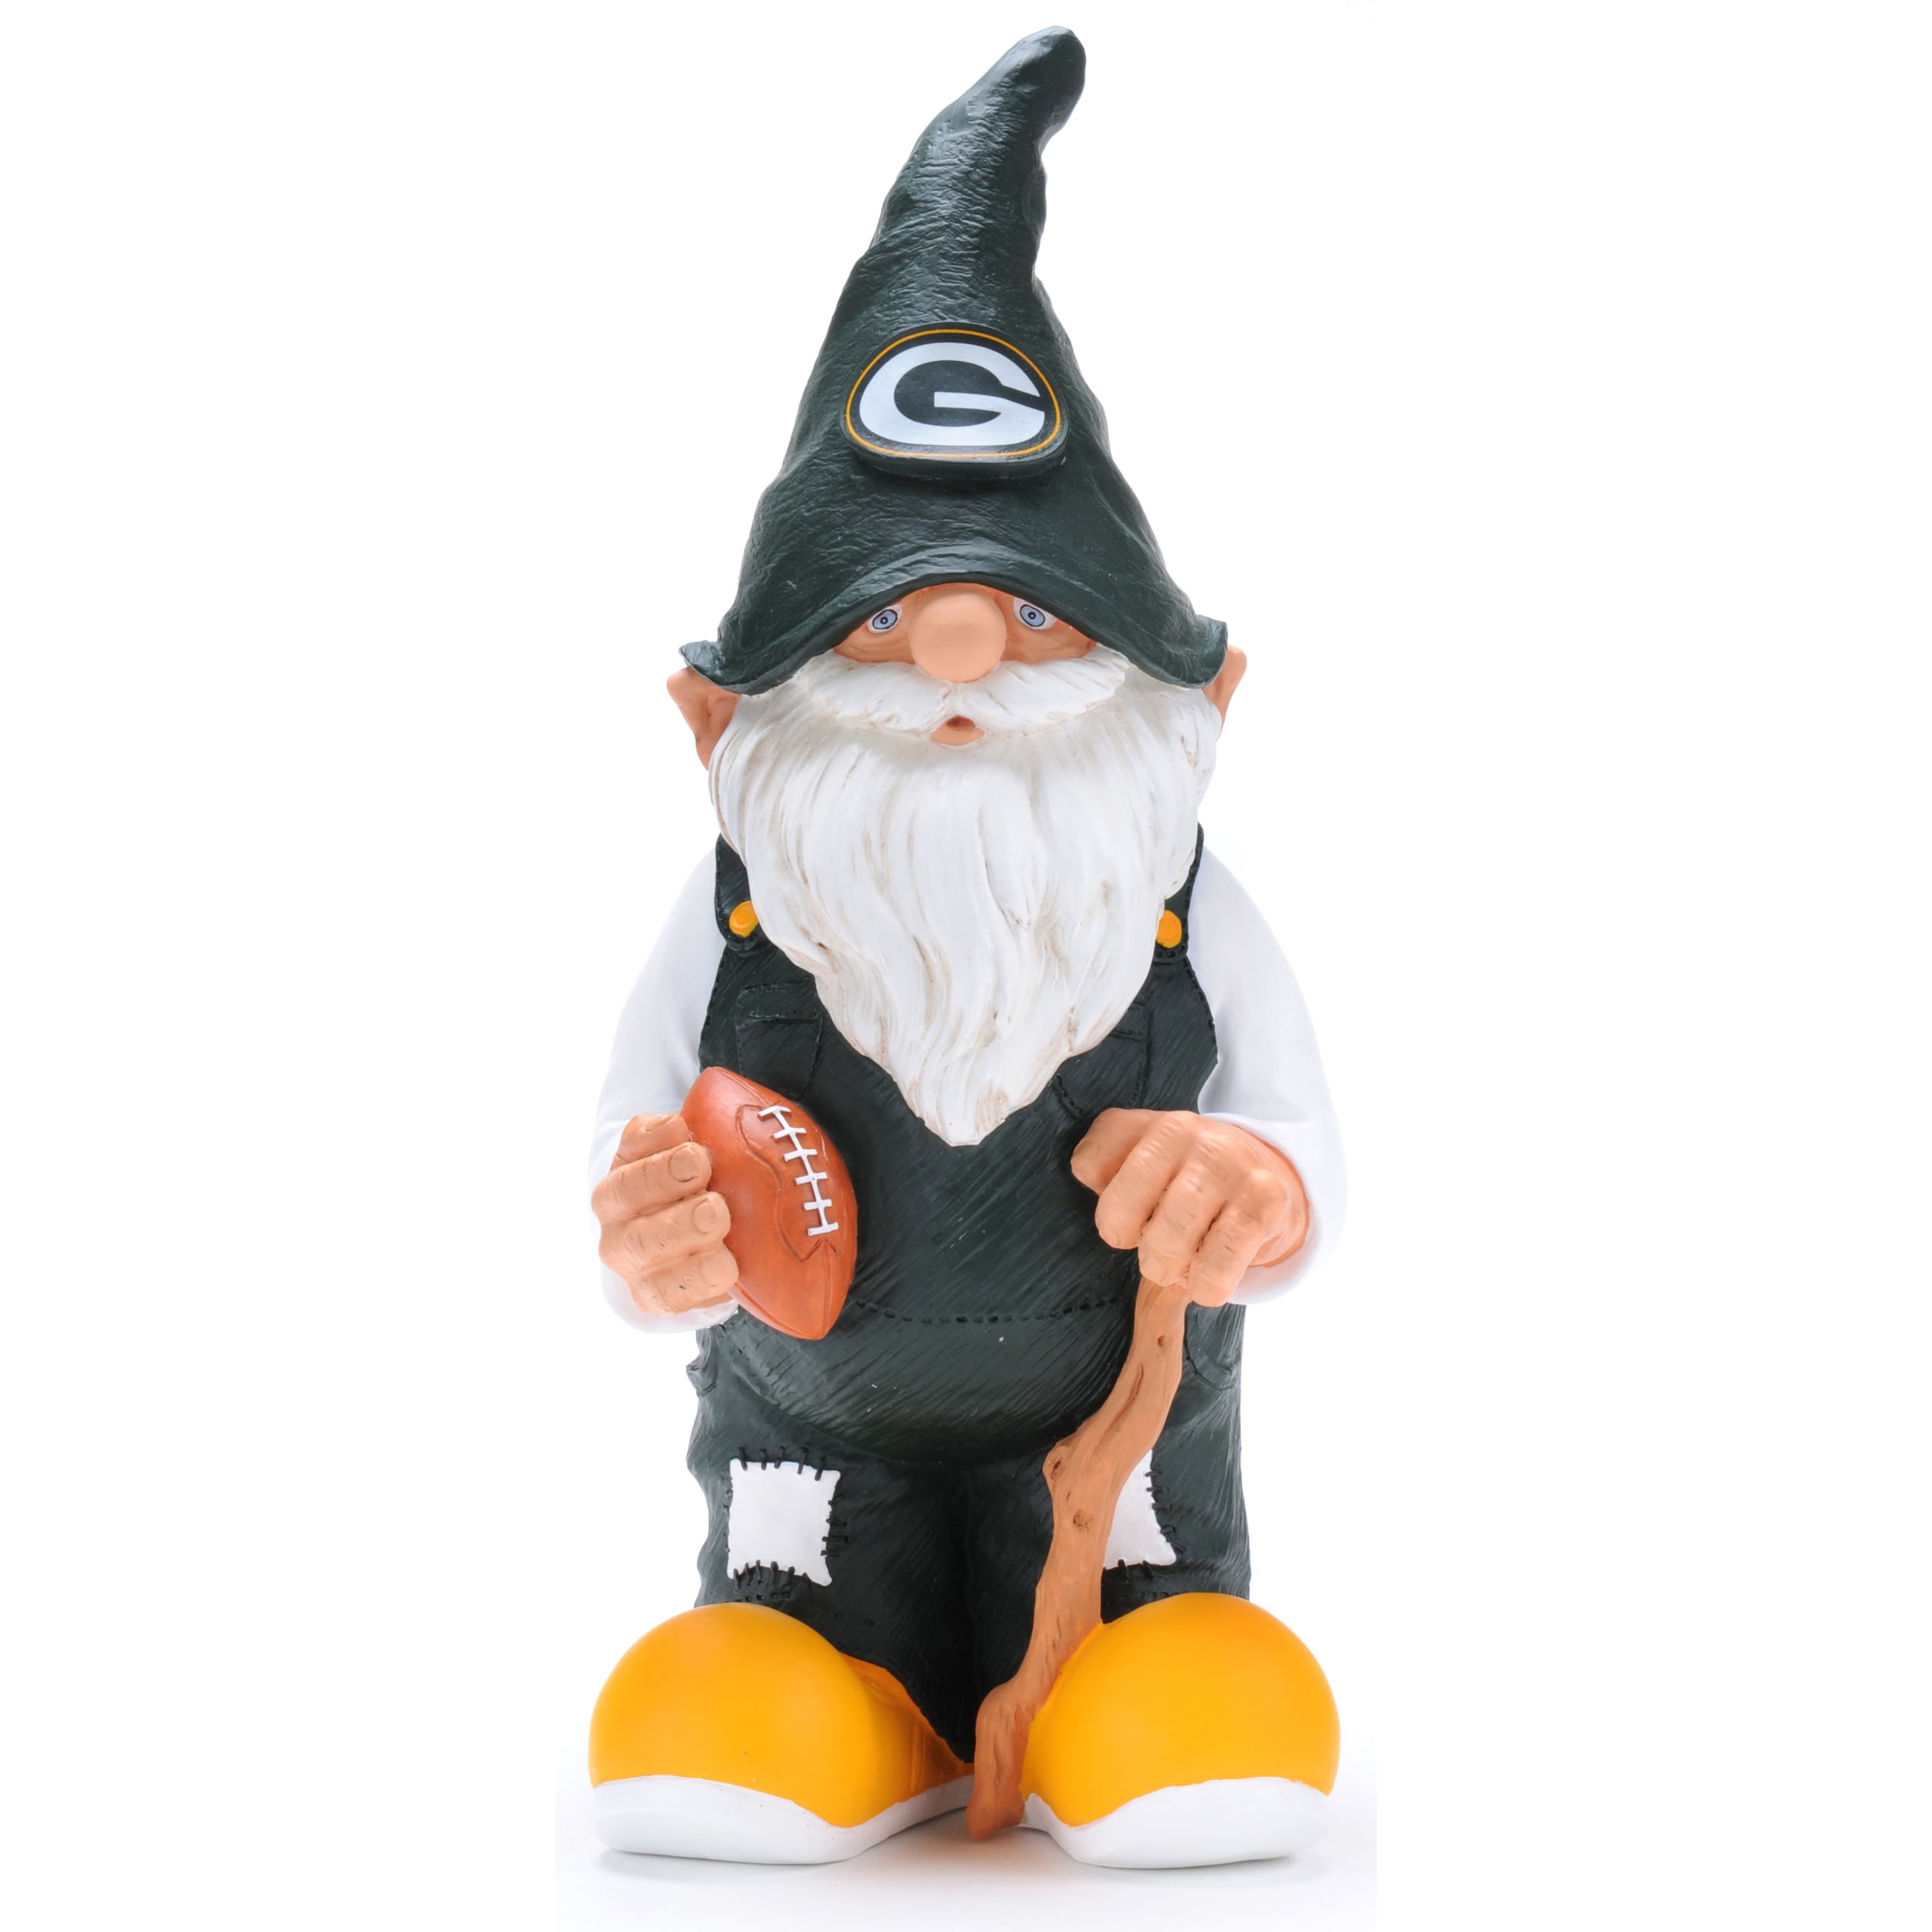 Forever Collectibles - NFL Licensed Team Gnome, Green Bay Packers